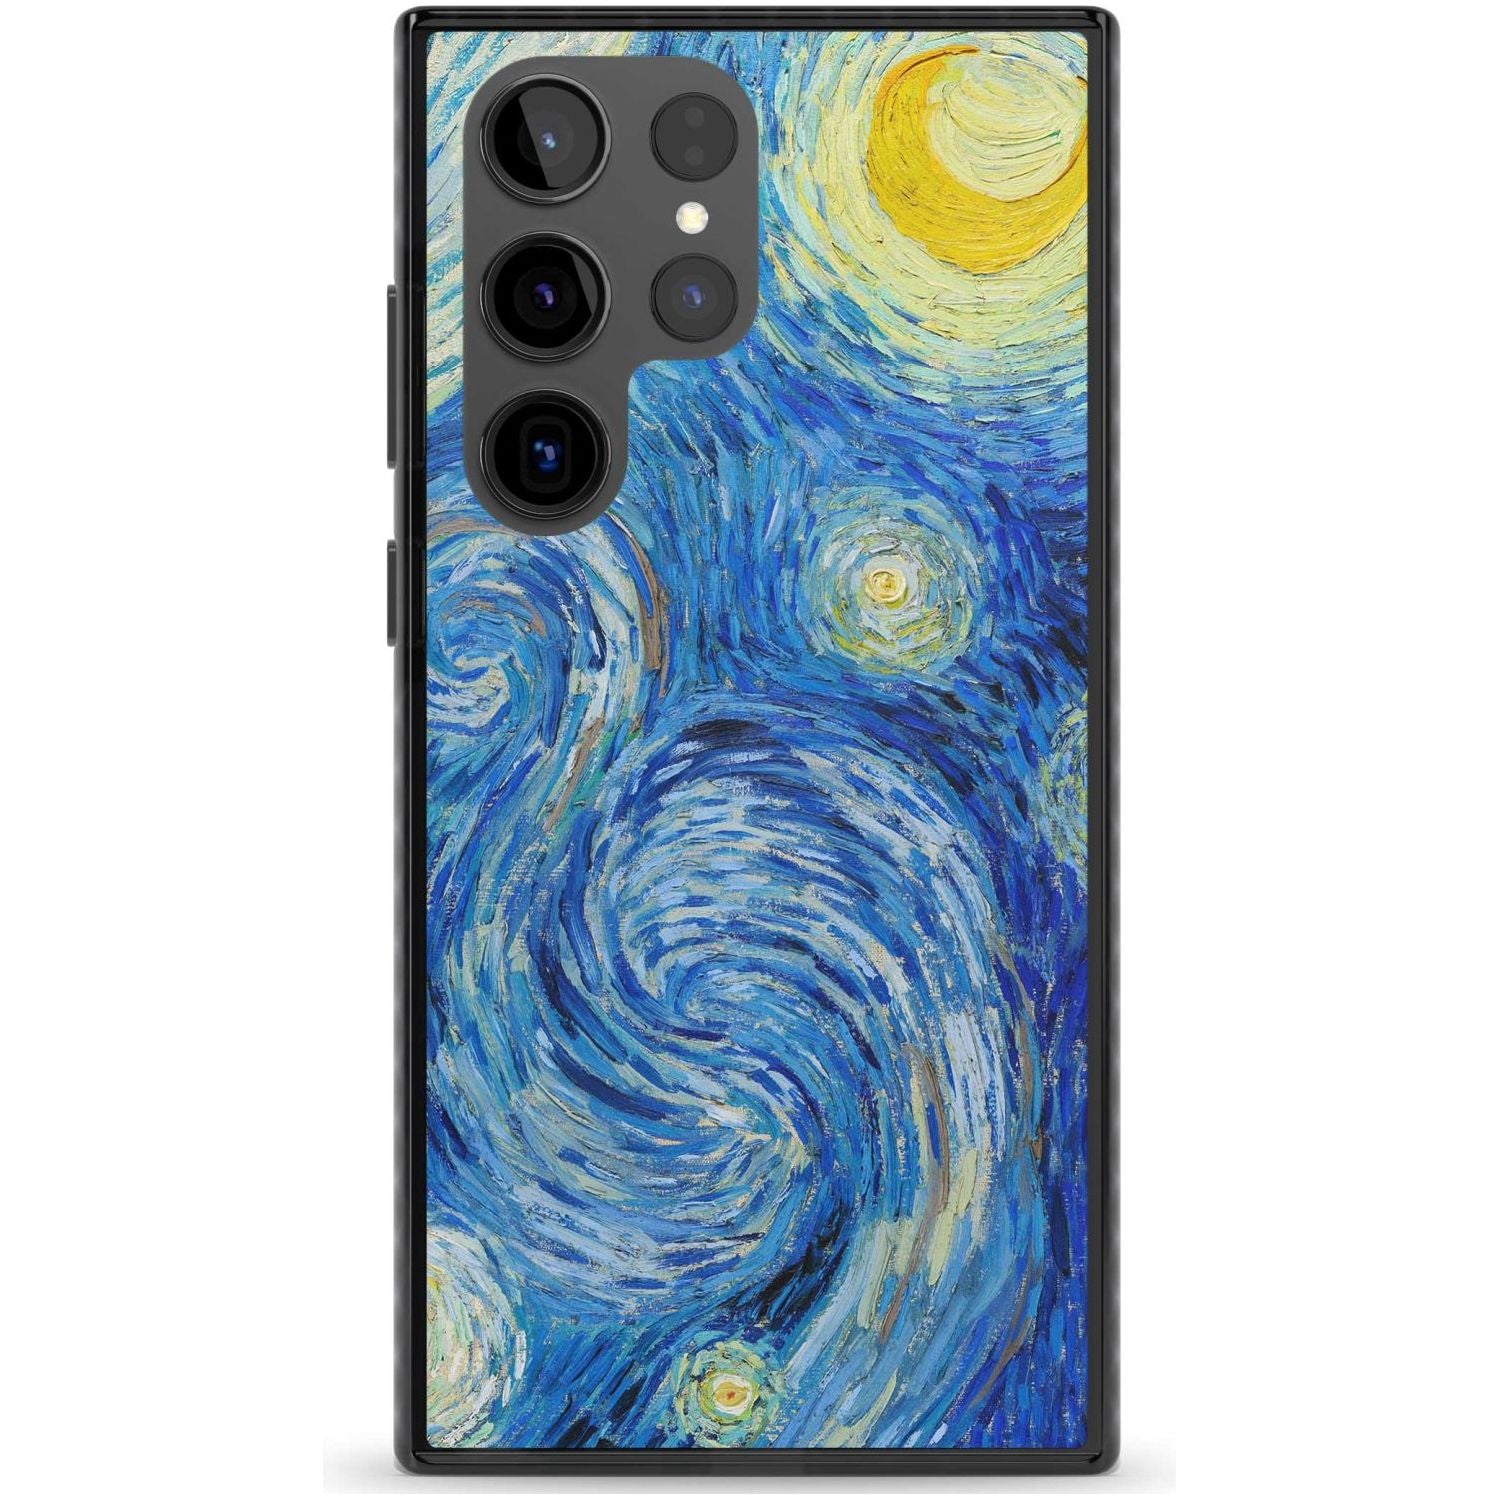 The Starry Night by Vincent Van Gogh